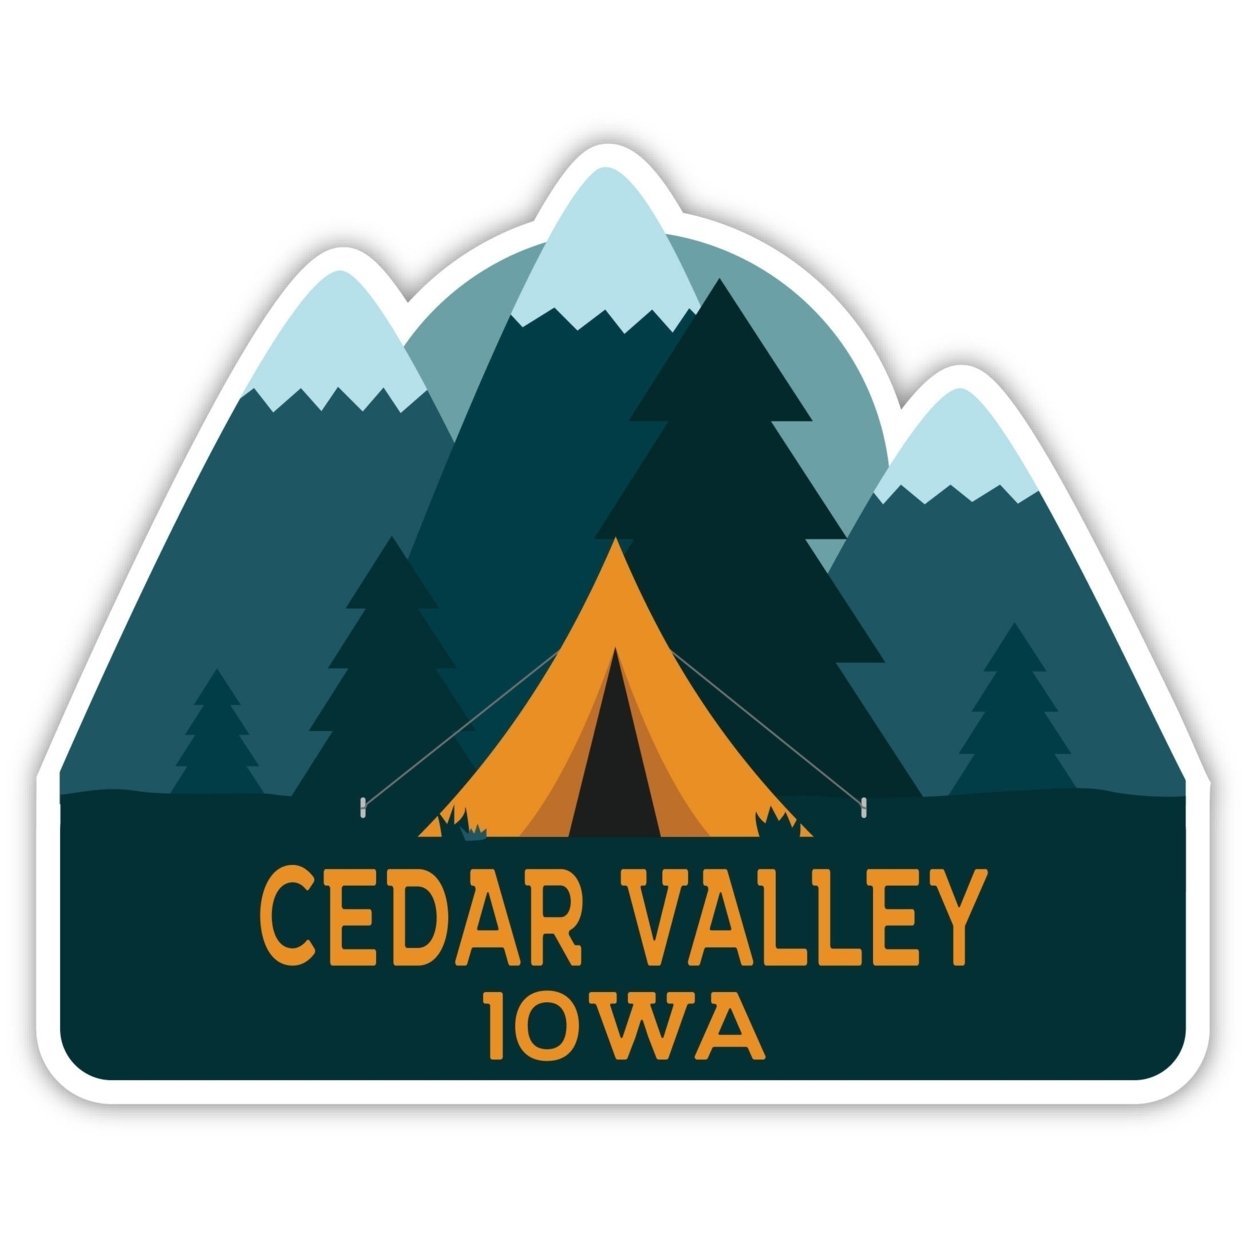 Cedar Valley Iowa Souvenir Decorative Stickers (Choose Theme And Size) - 4-Pack, 10-Inch, Tent